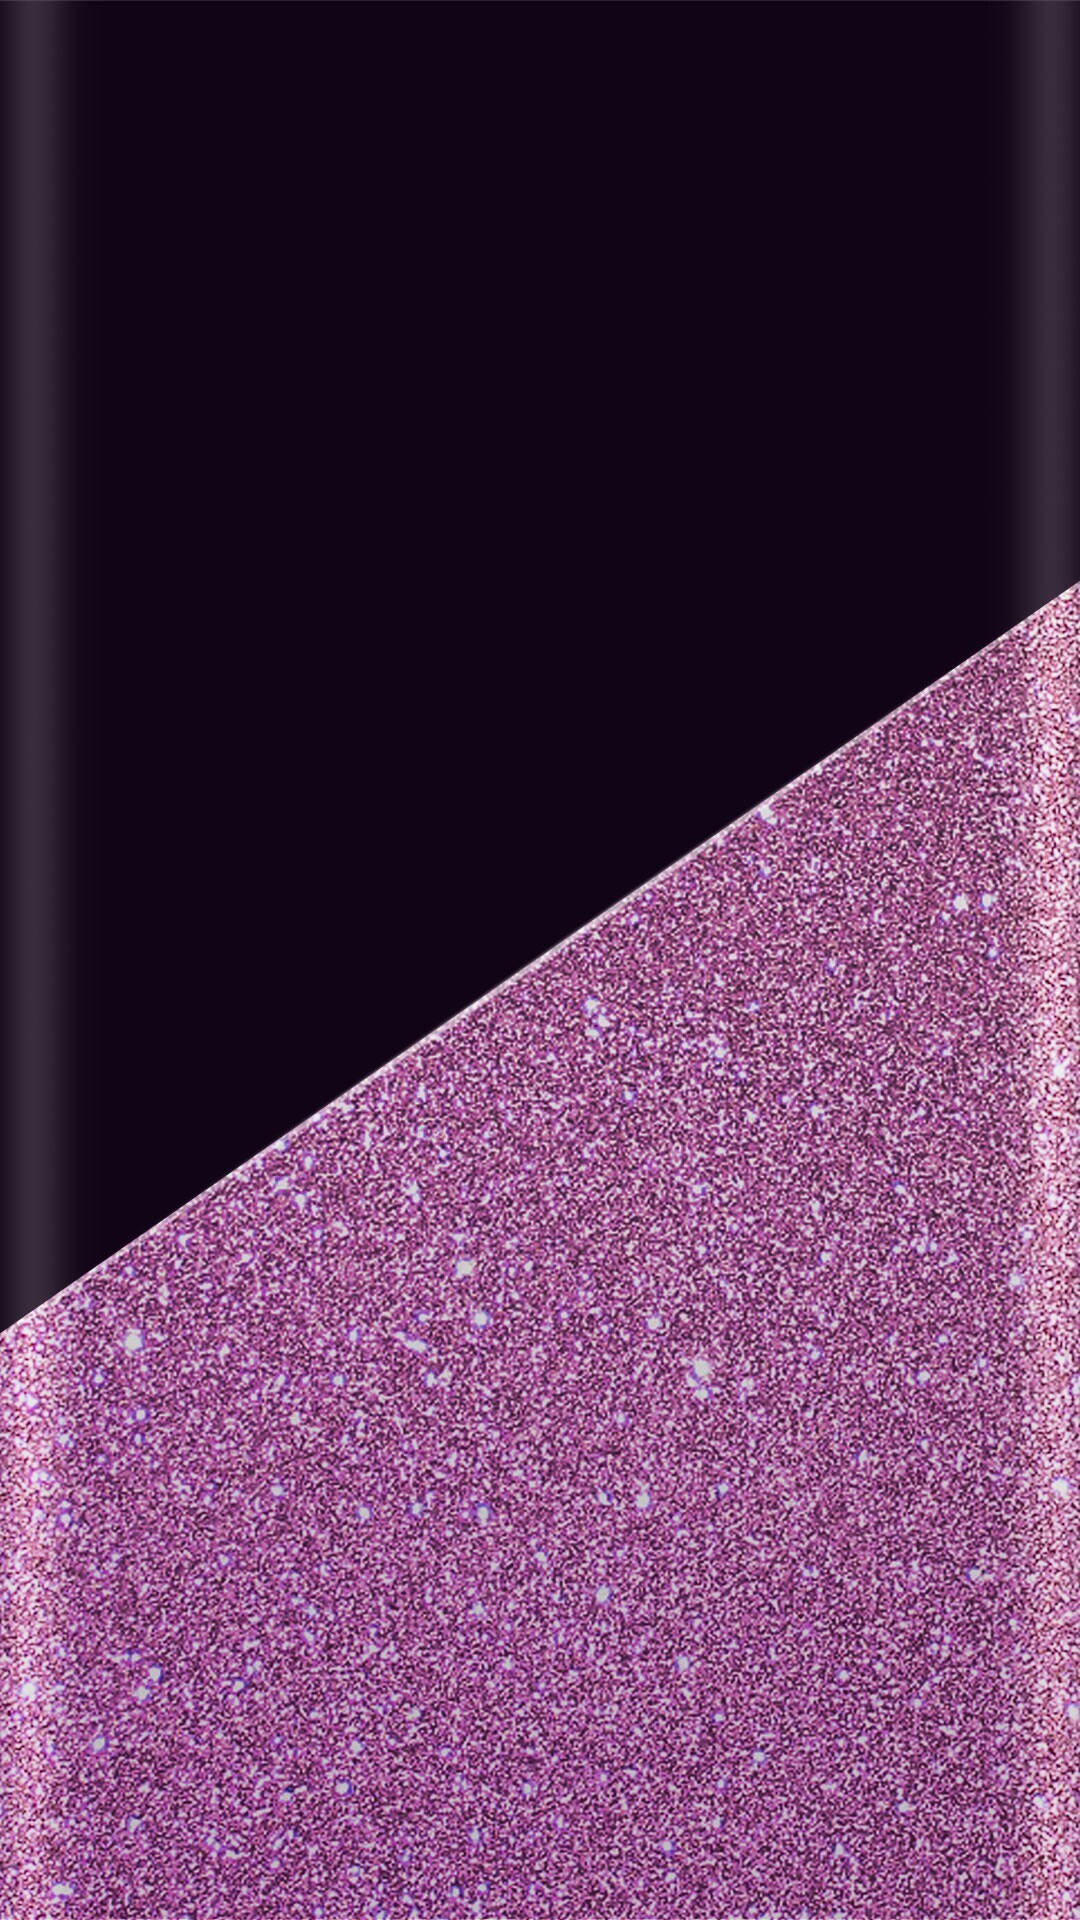 1080x1920 Black and purple. Phone BackgroundsWallpaper ...